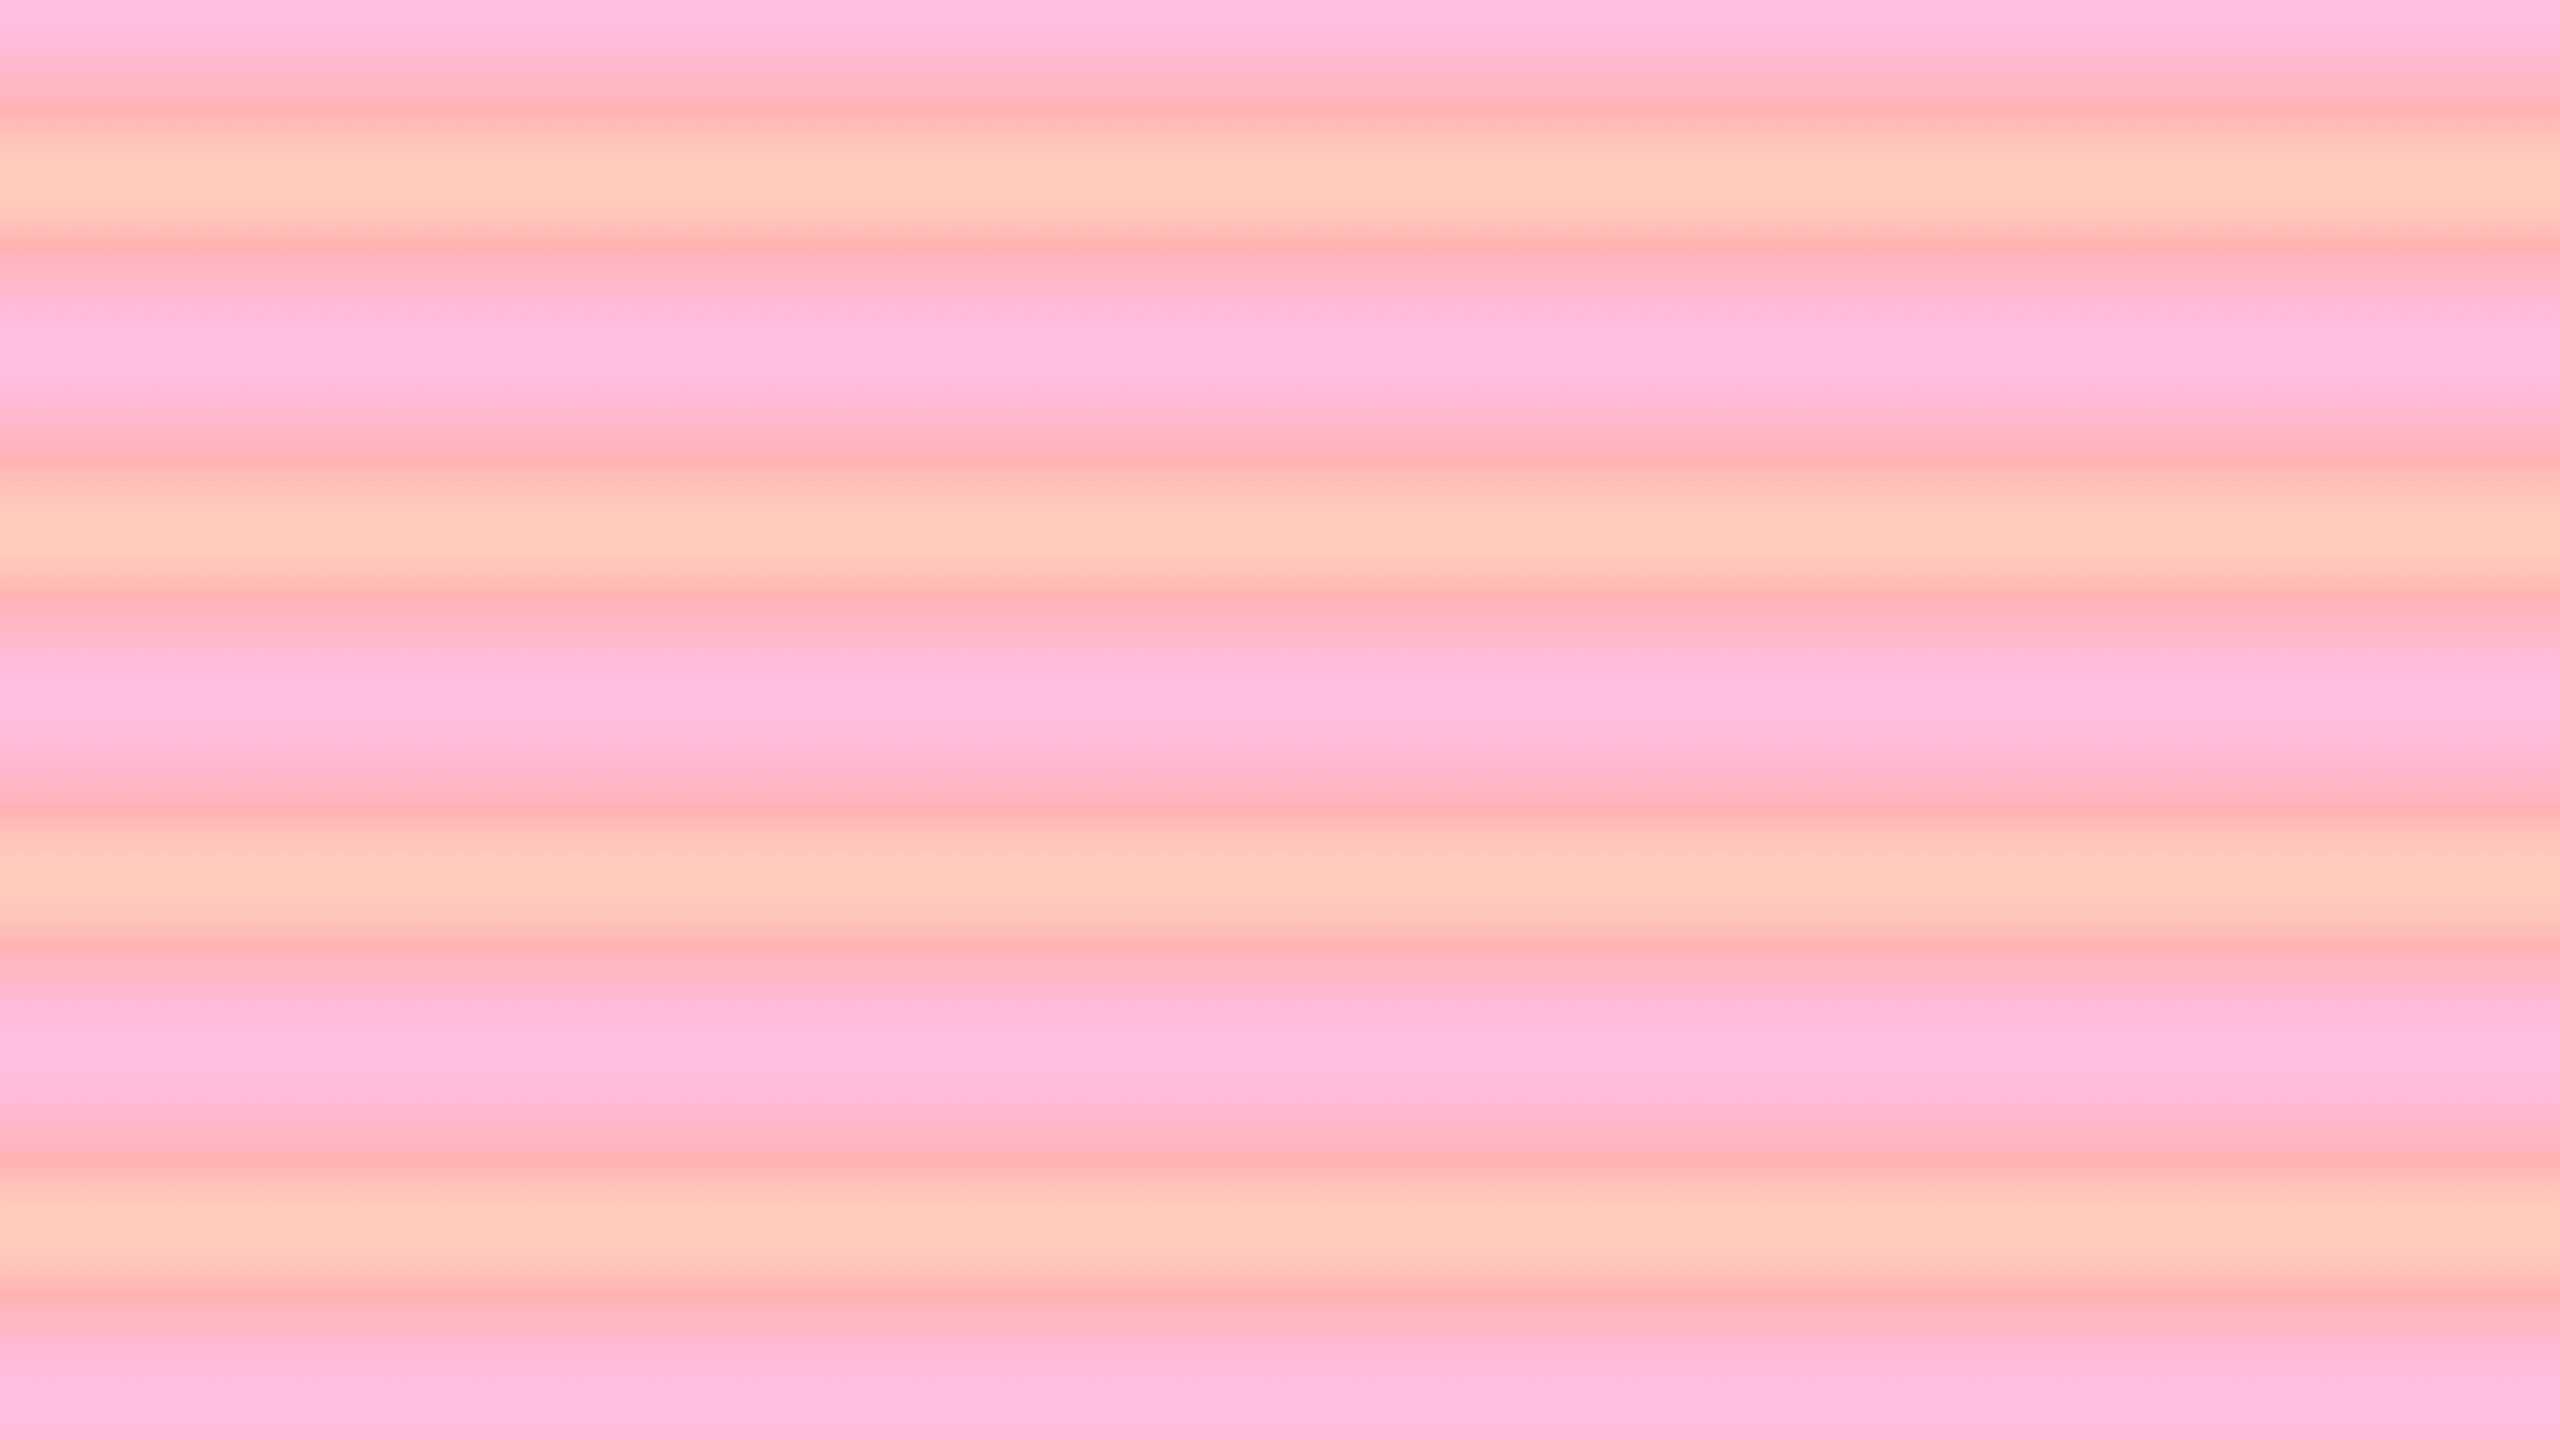 this Peach Pastel Desktop Wallpaper is easy Just save the wallpaper